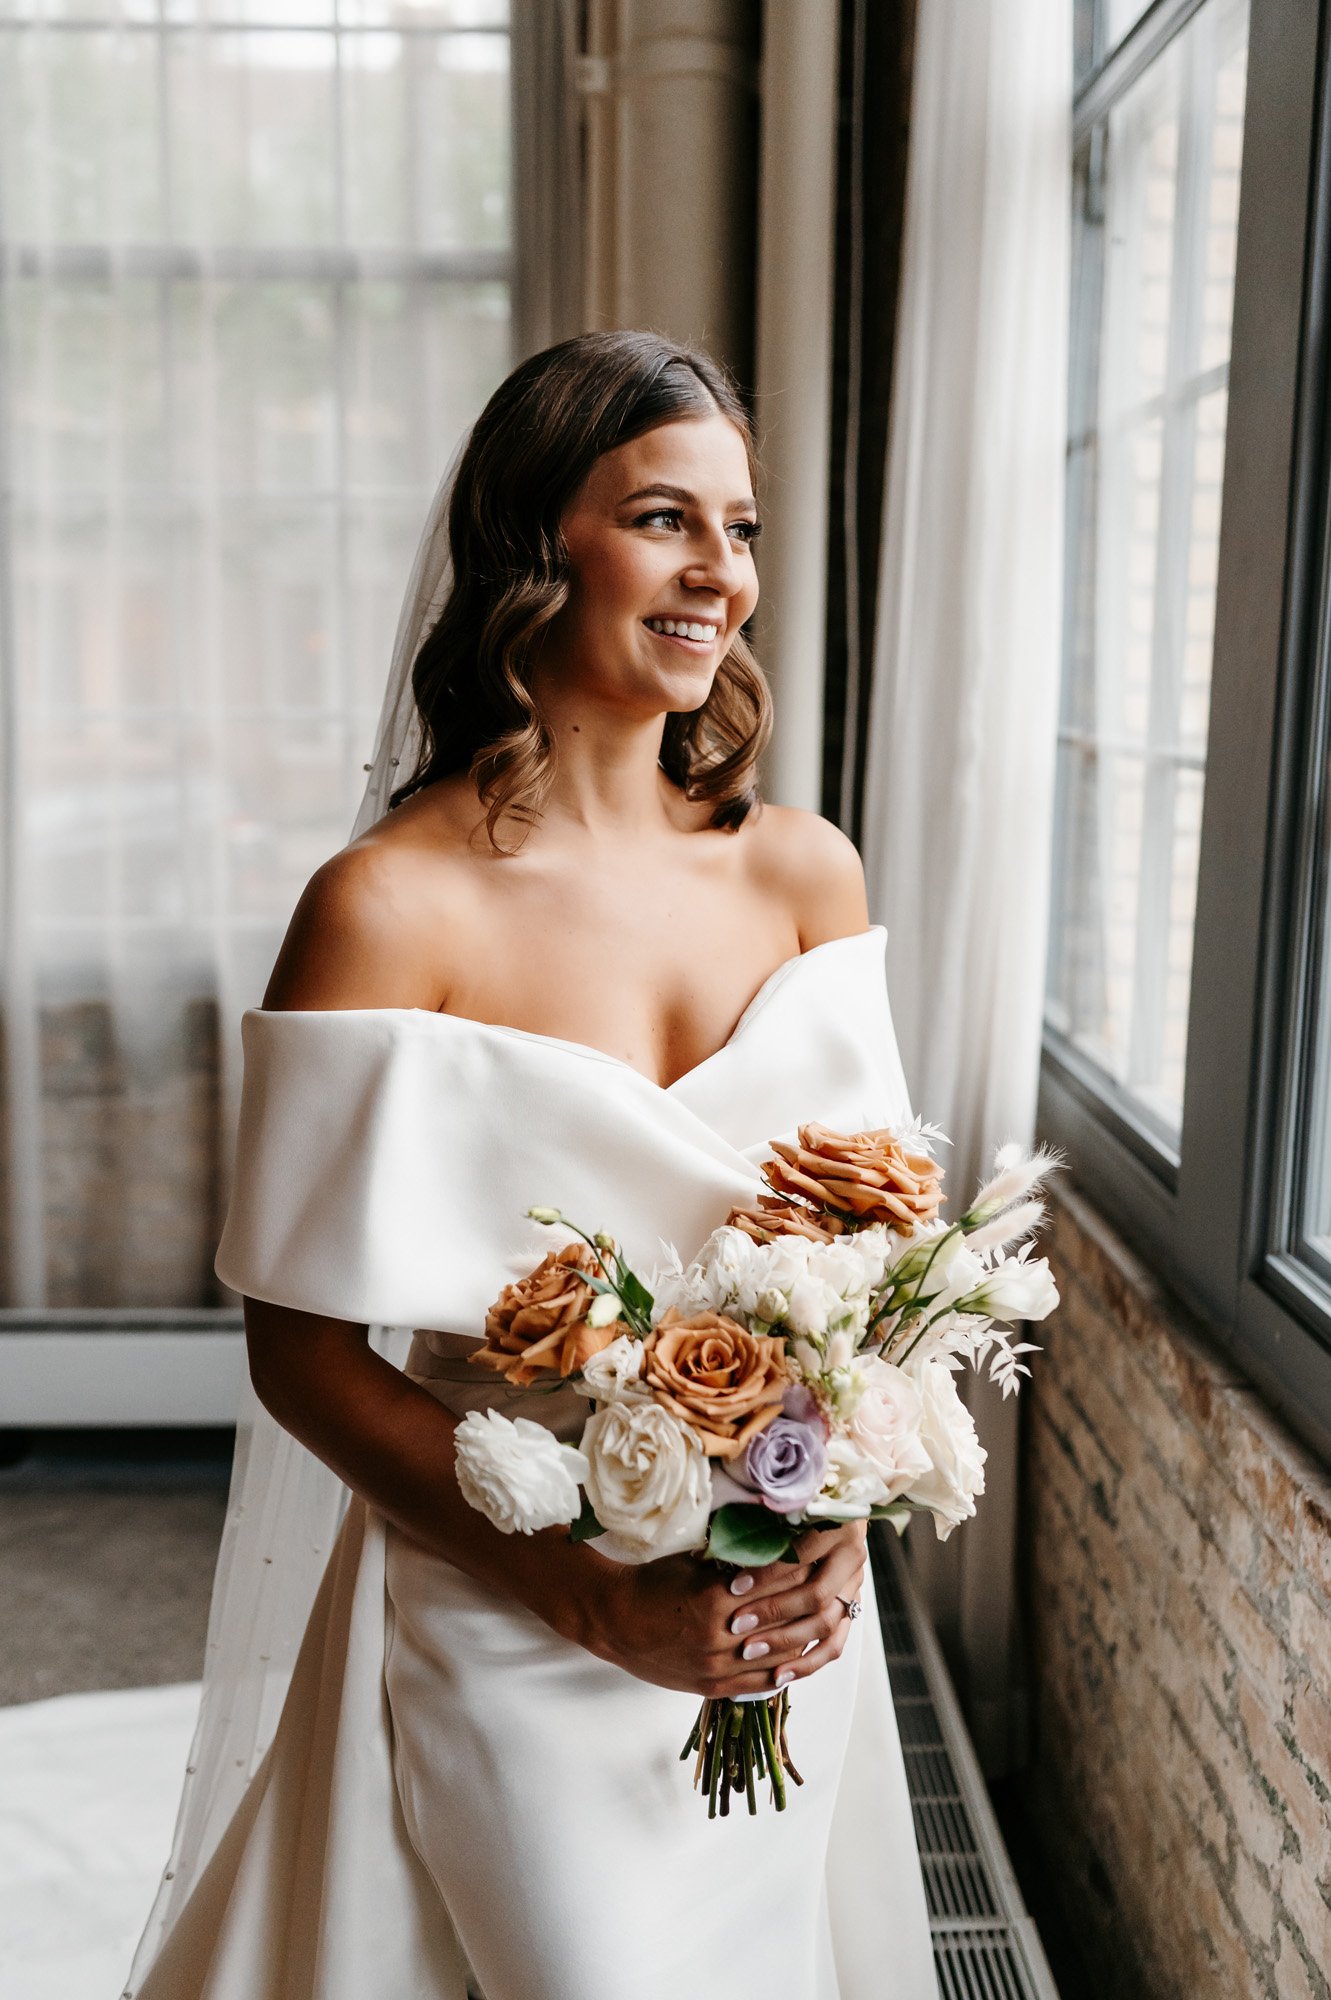 the happy bride looking out the window in her off the shoulder wedding dress by eva lendel